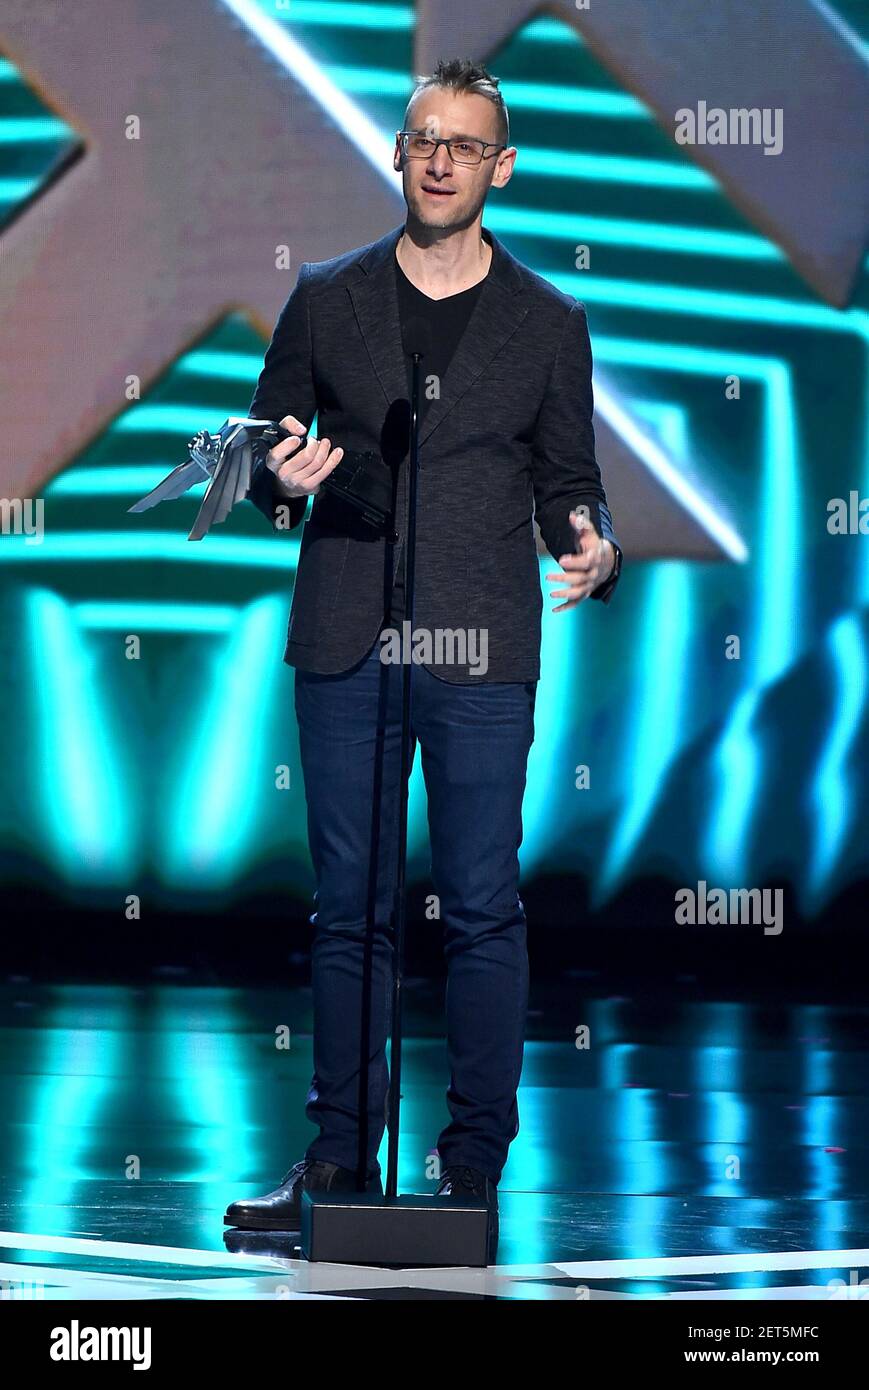 LOS ANGELES - DECEMBER 6: Donald Mustard accepts the Best Ongoing Game award  for “Fortnite” (Epic Games) at the 2018 Game Awards at the Microsoft  Theater on December 6, 2018 in Los